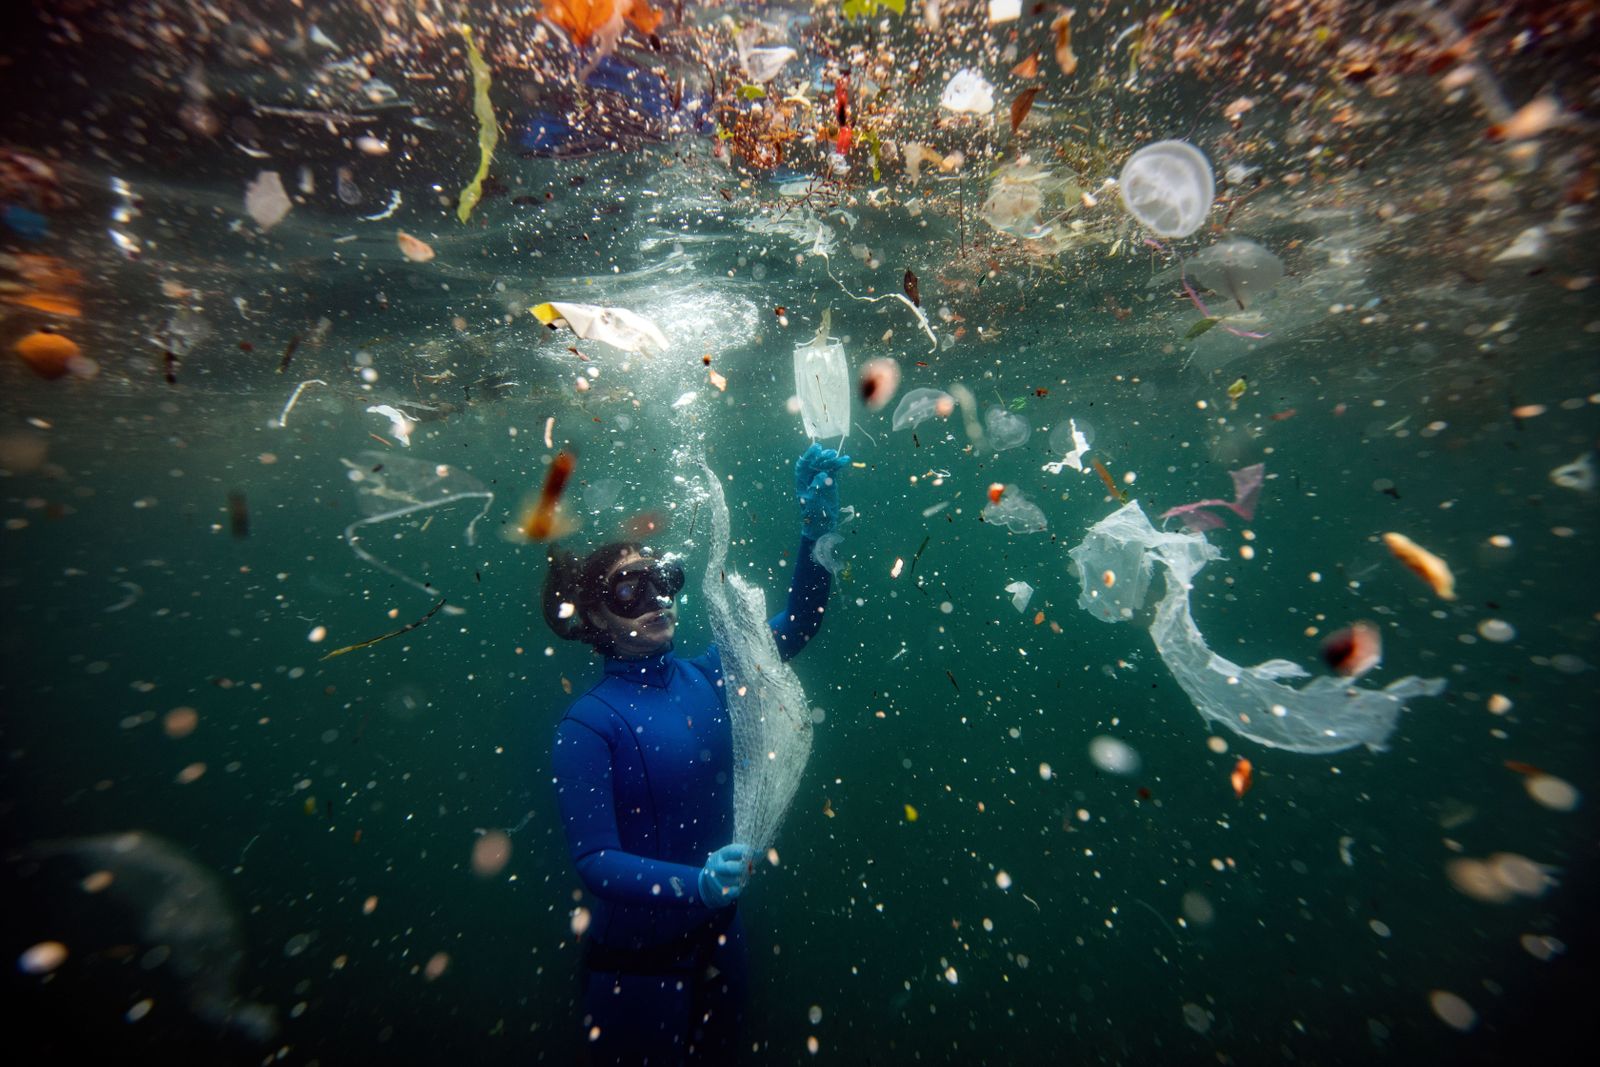 Scientists Discover Microbes That Could Revolutionize Plastic Recycling